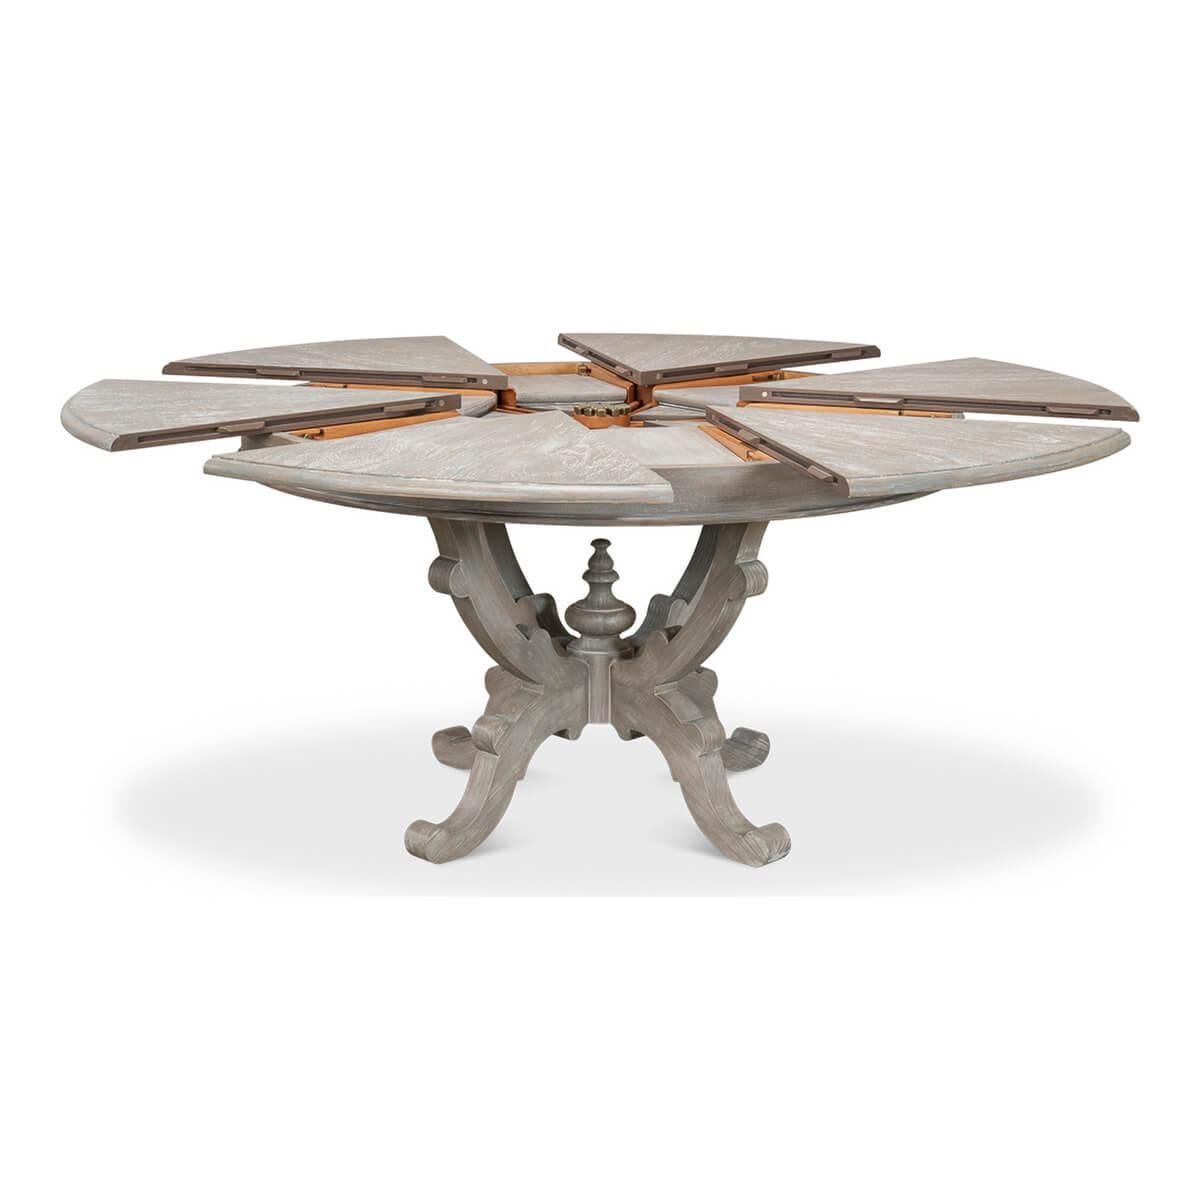 A Renaissance-inspired painted Table with a four-leg Renaissance-inspired central pedestal base with a large finial, the extendable dining table top closes to 54